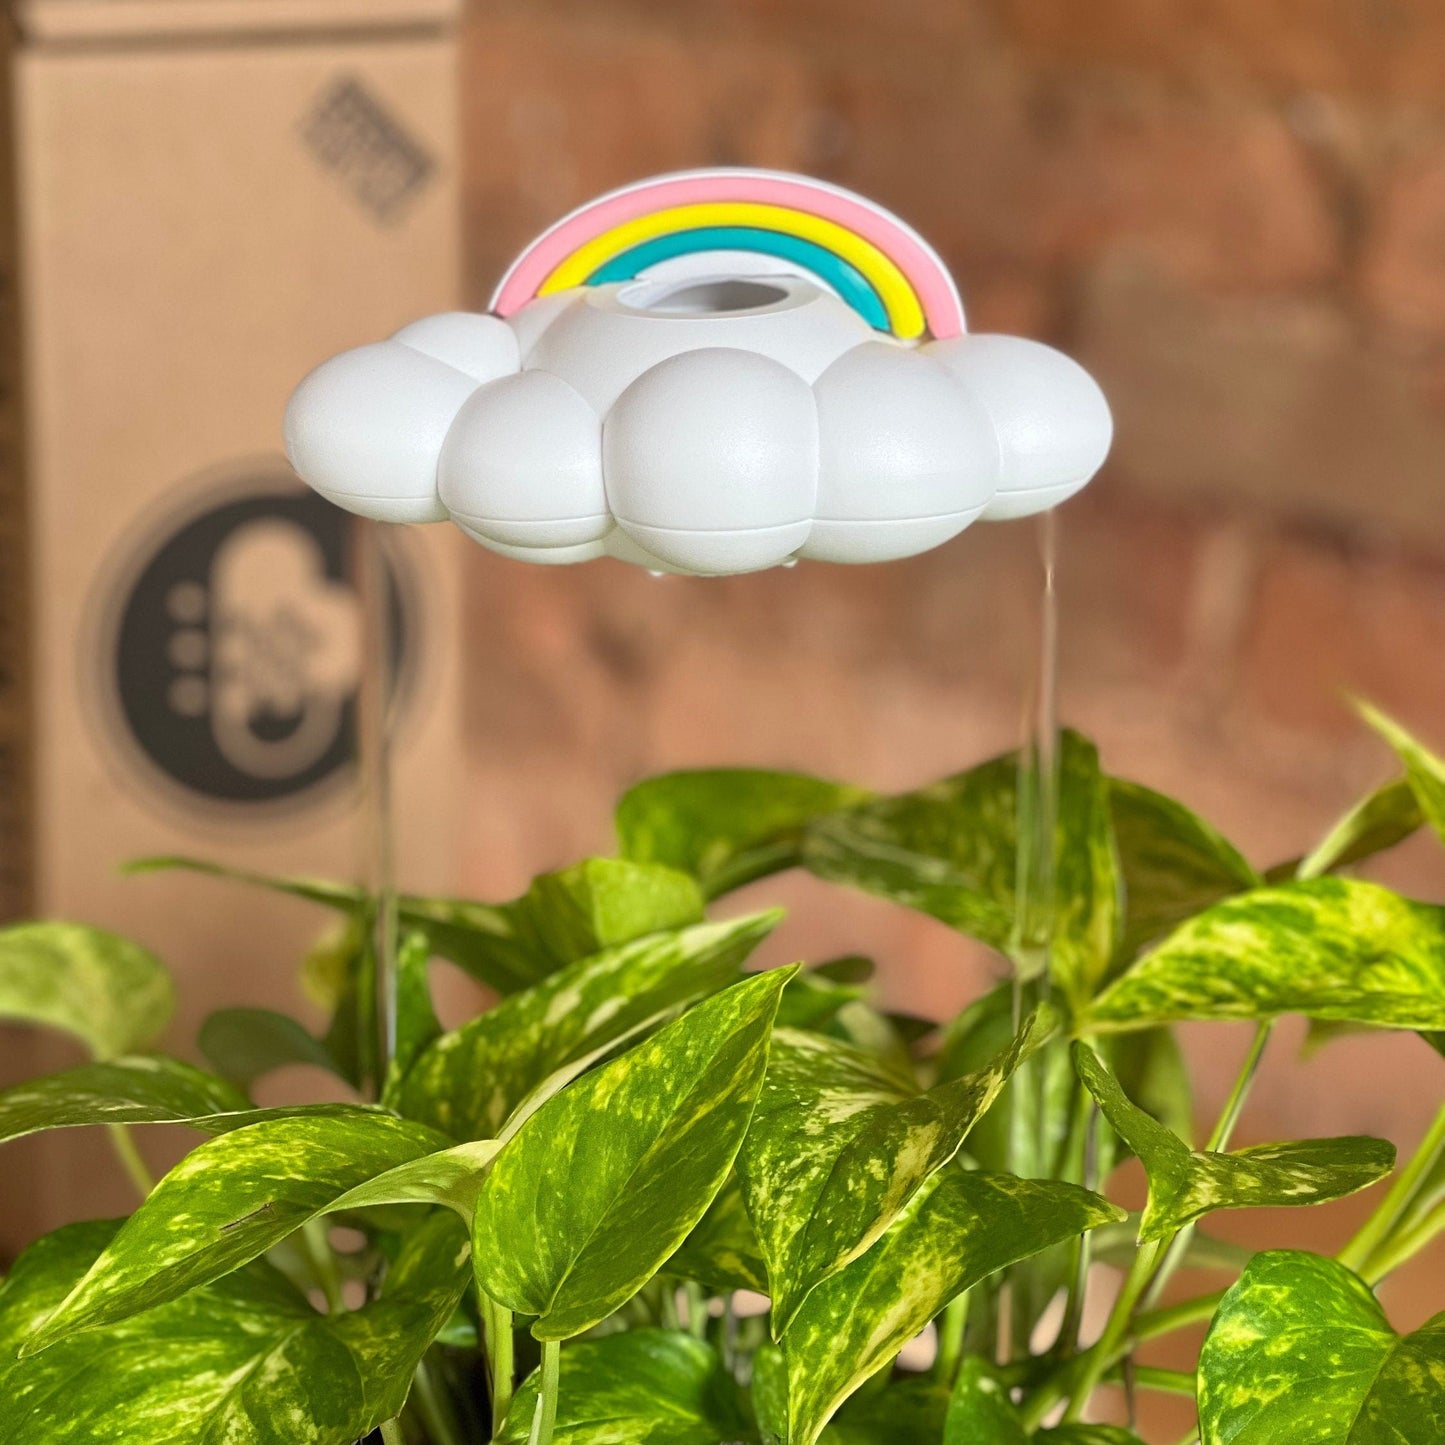 Original Dripping Rain Cloud by THE CLOUD MAKERS with Pastel Rainbow Charm